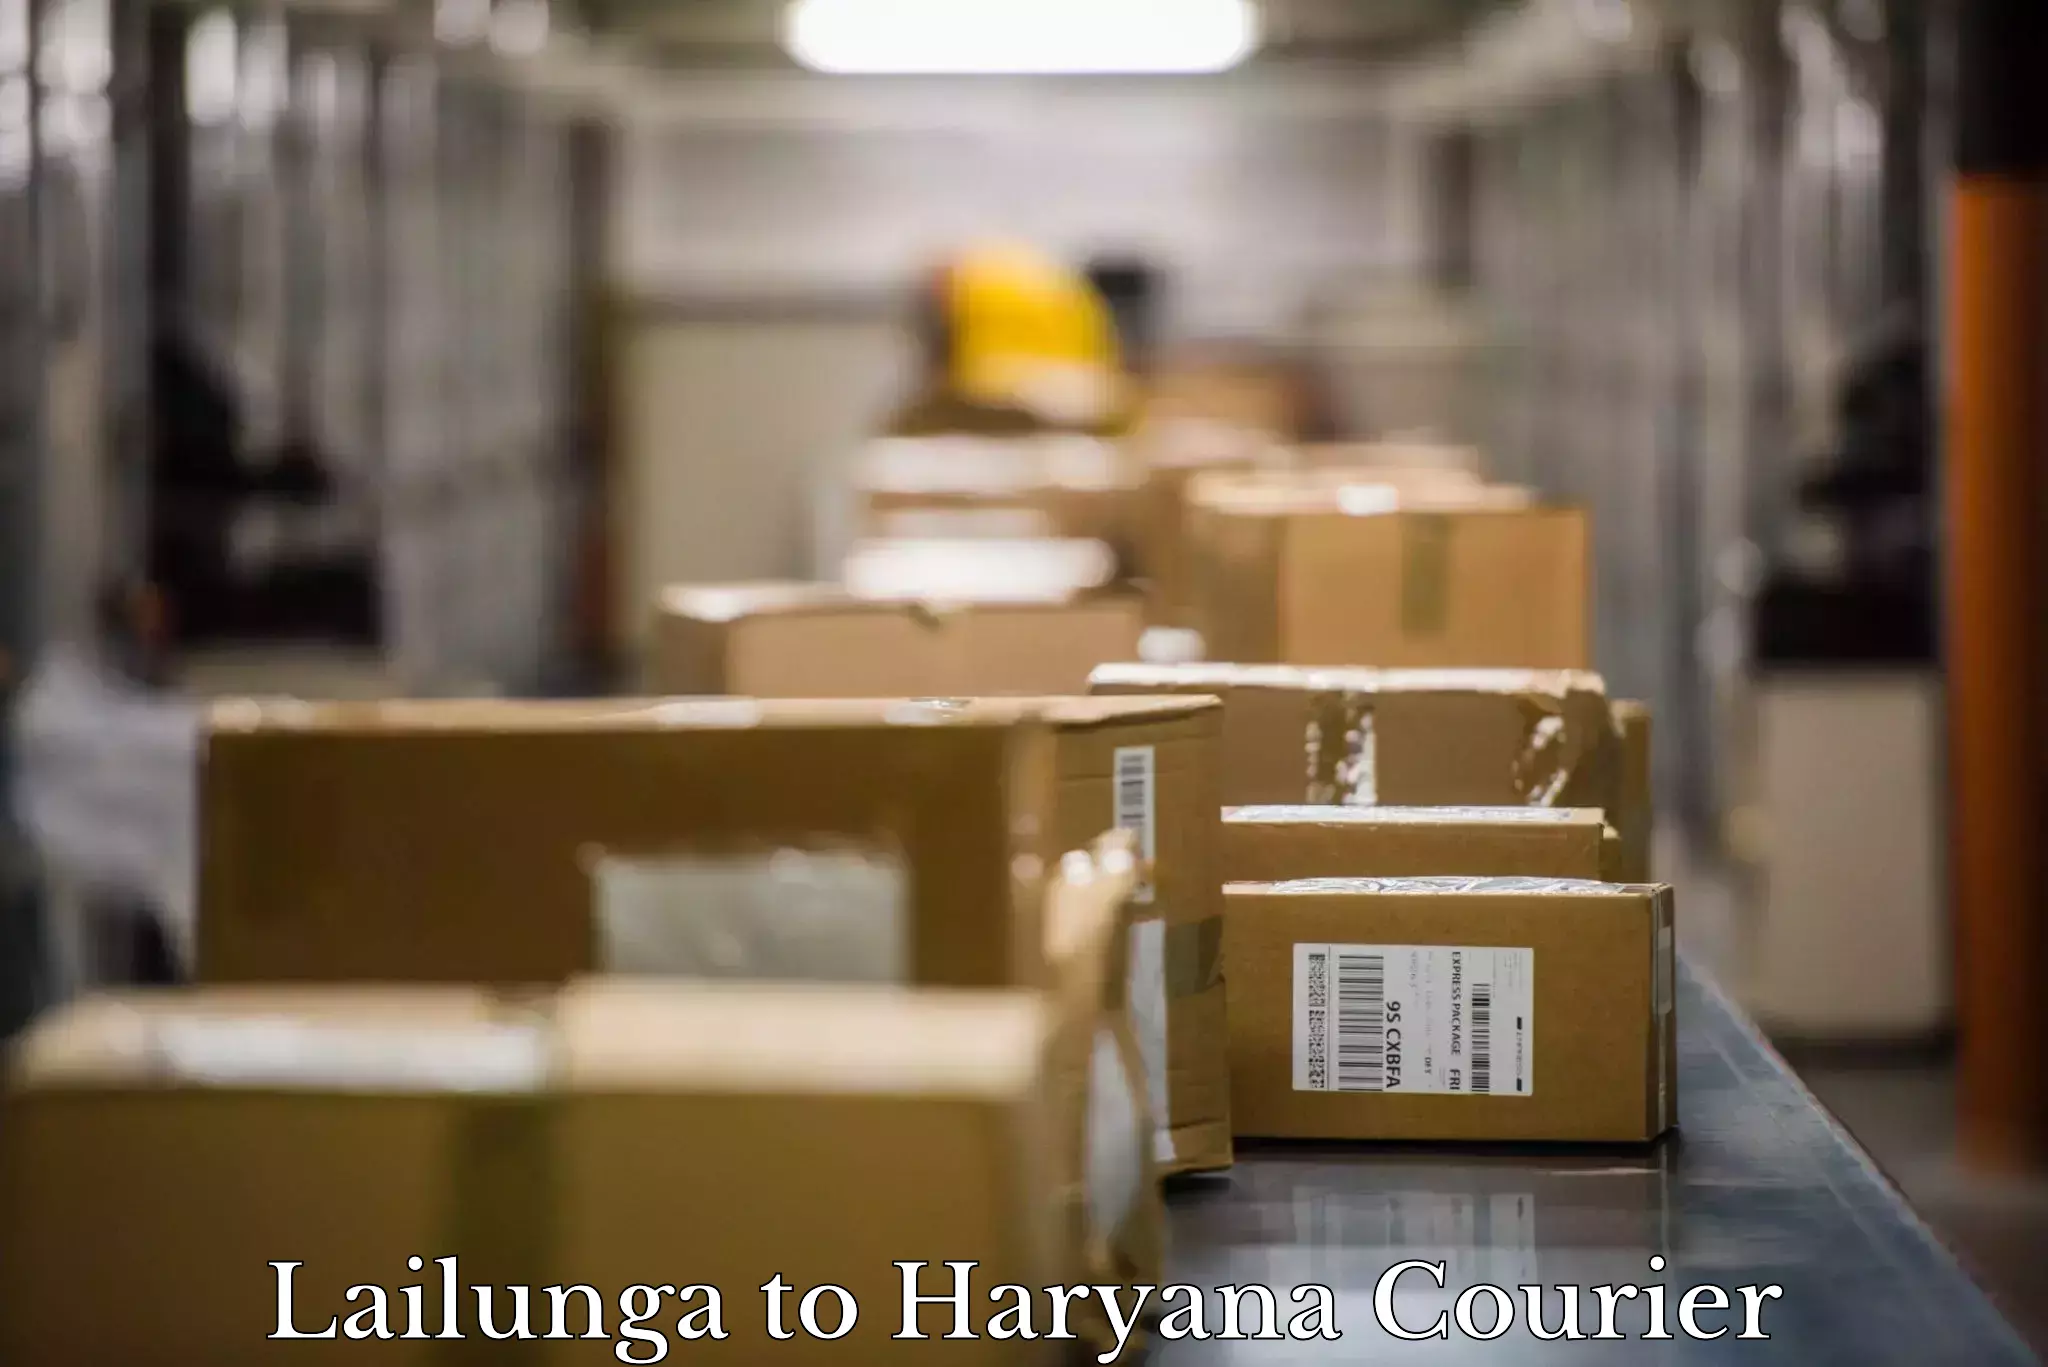 Cost-effective moving options Lailunga to Chaudhary Charan Singh Haryana Agricultural University Hisar